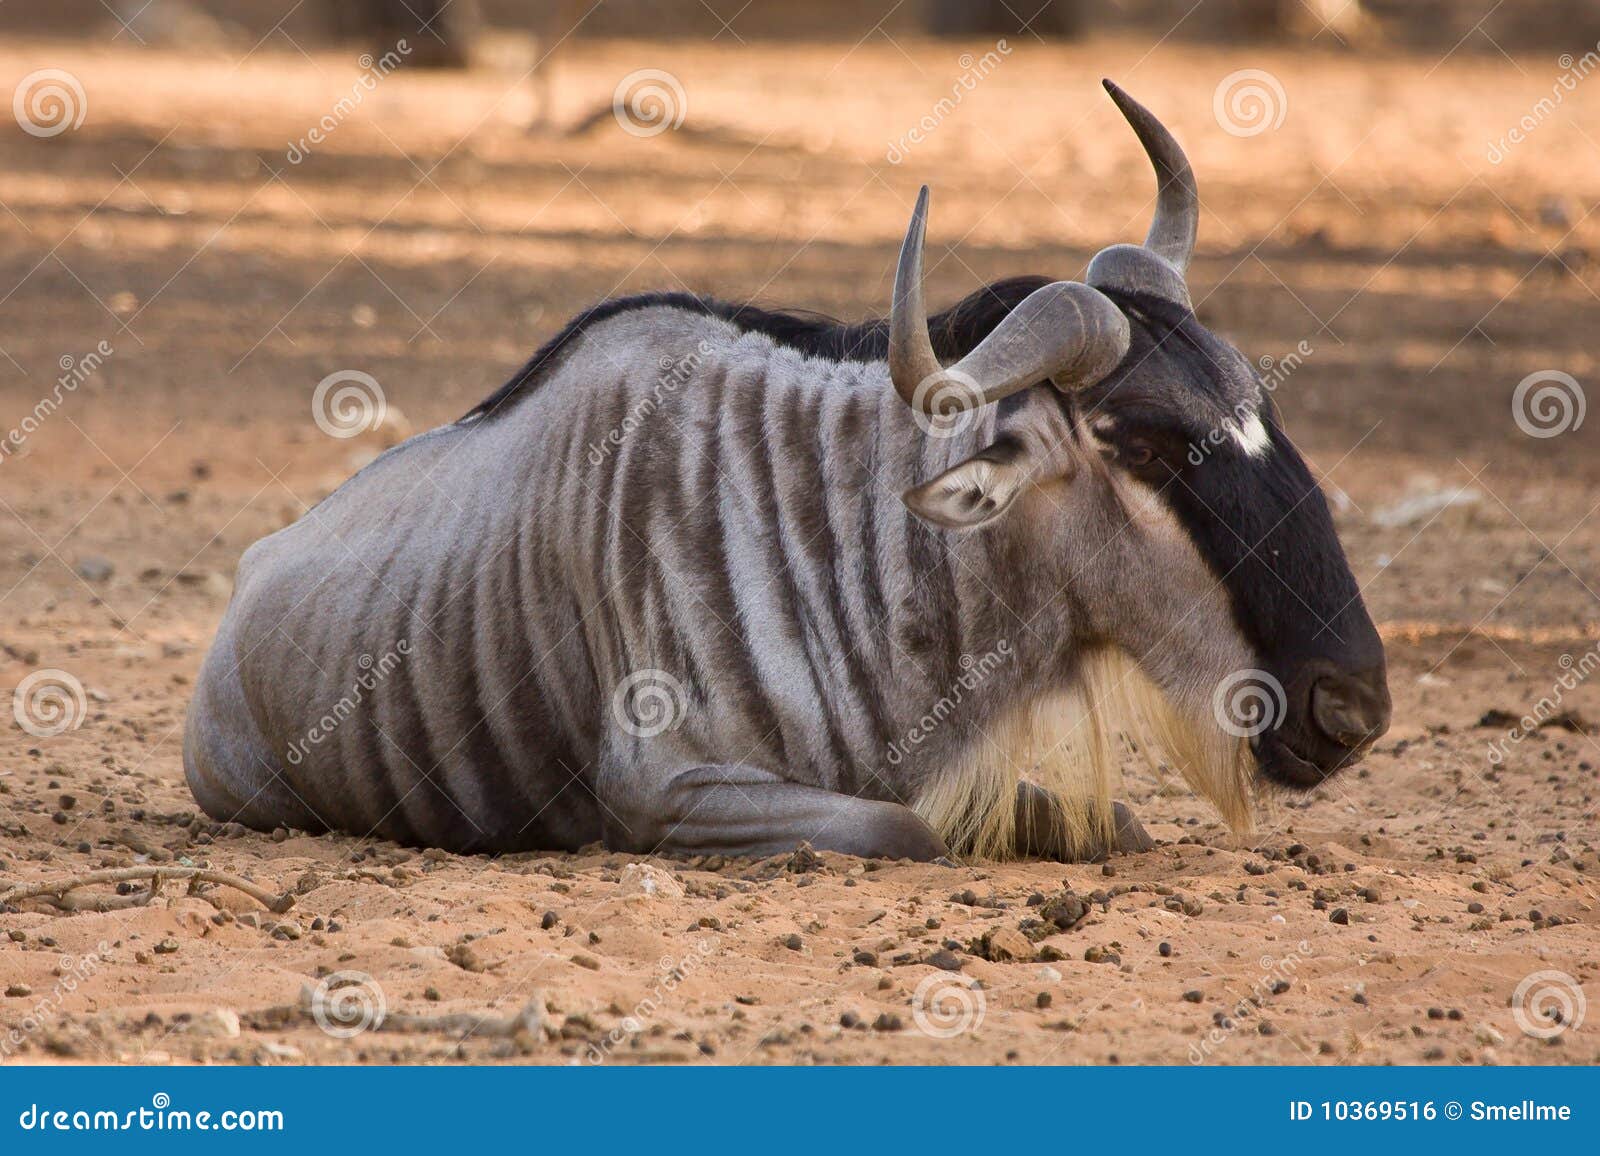 6,441 Gnu Photos - Free  Royalty-Free Stock Photos from Dreamstime